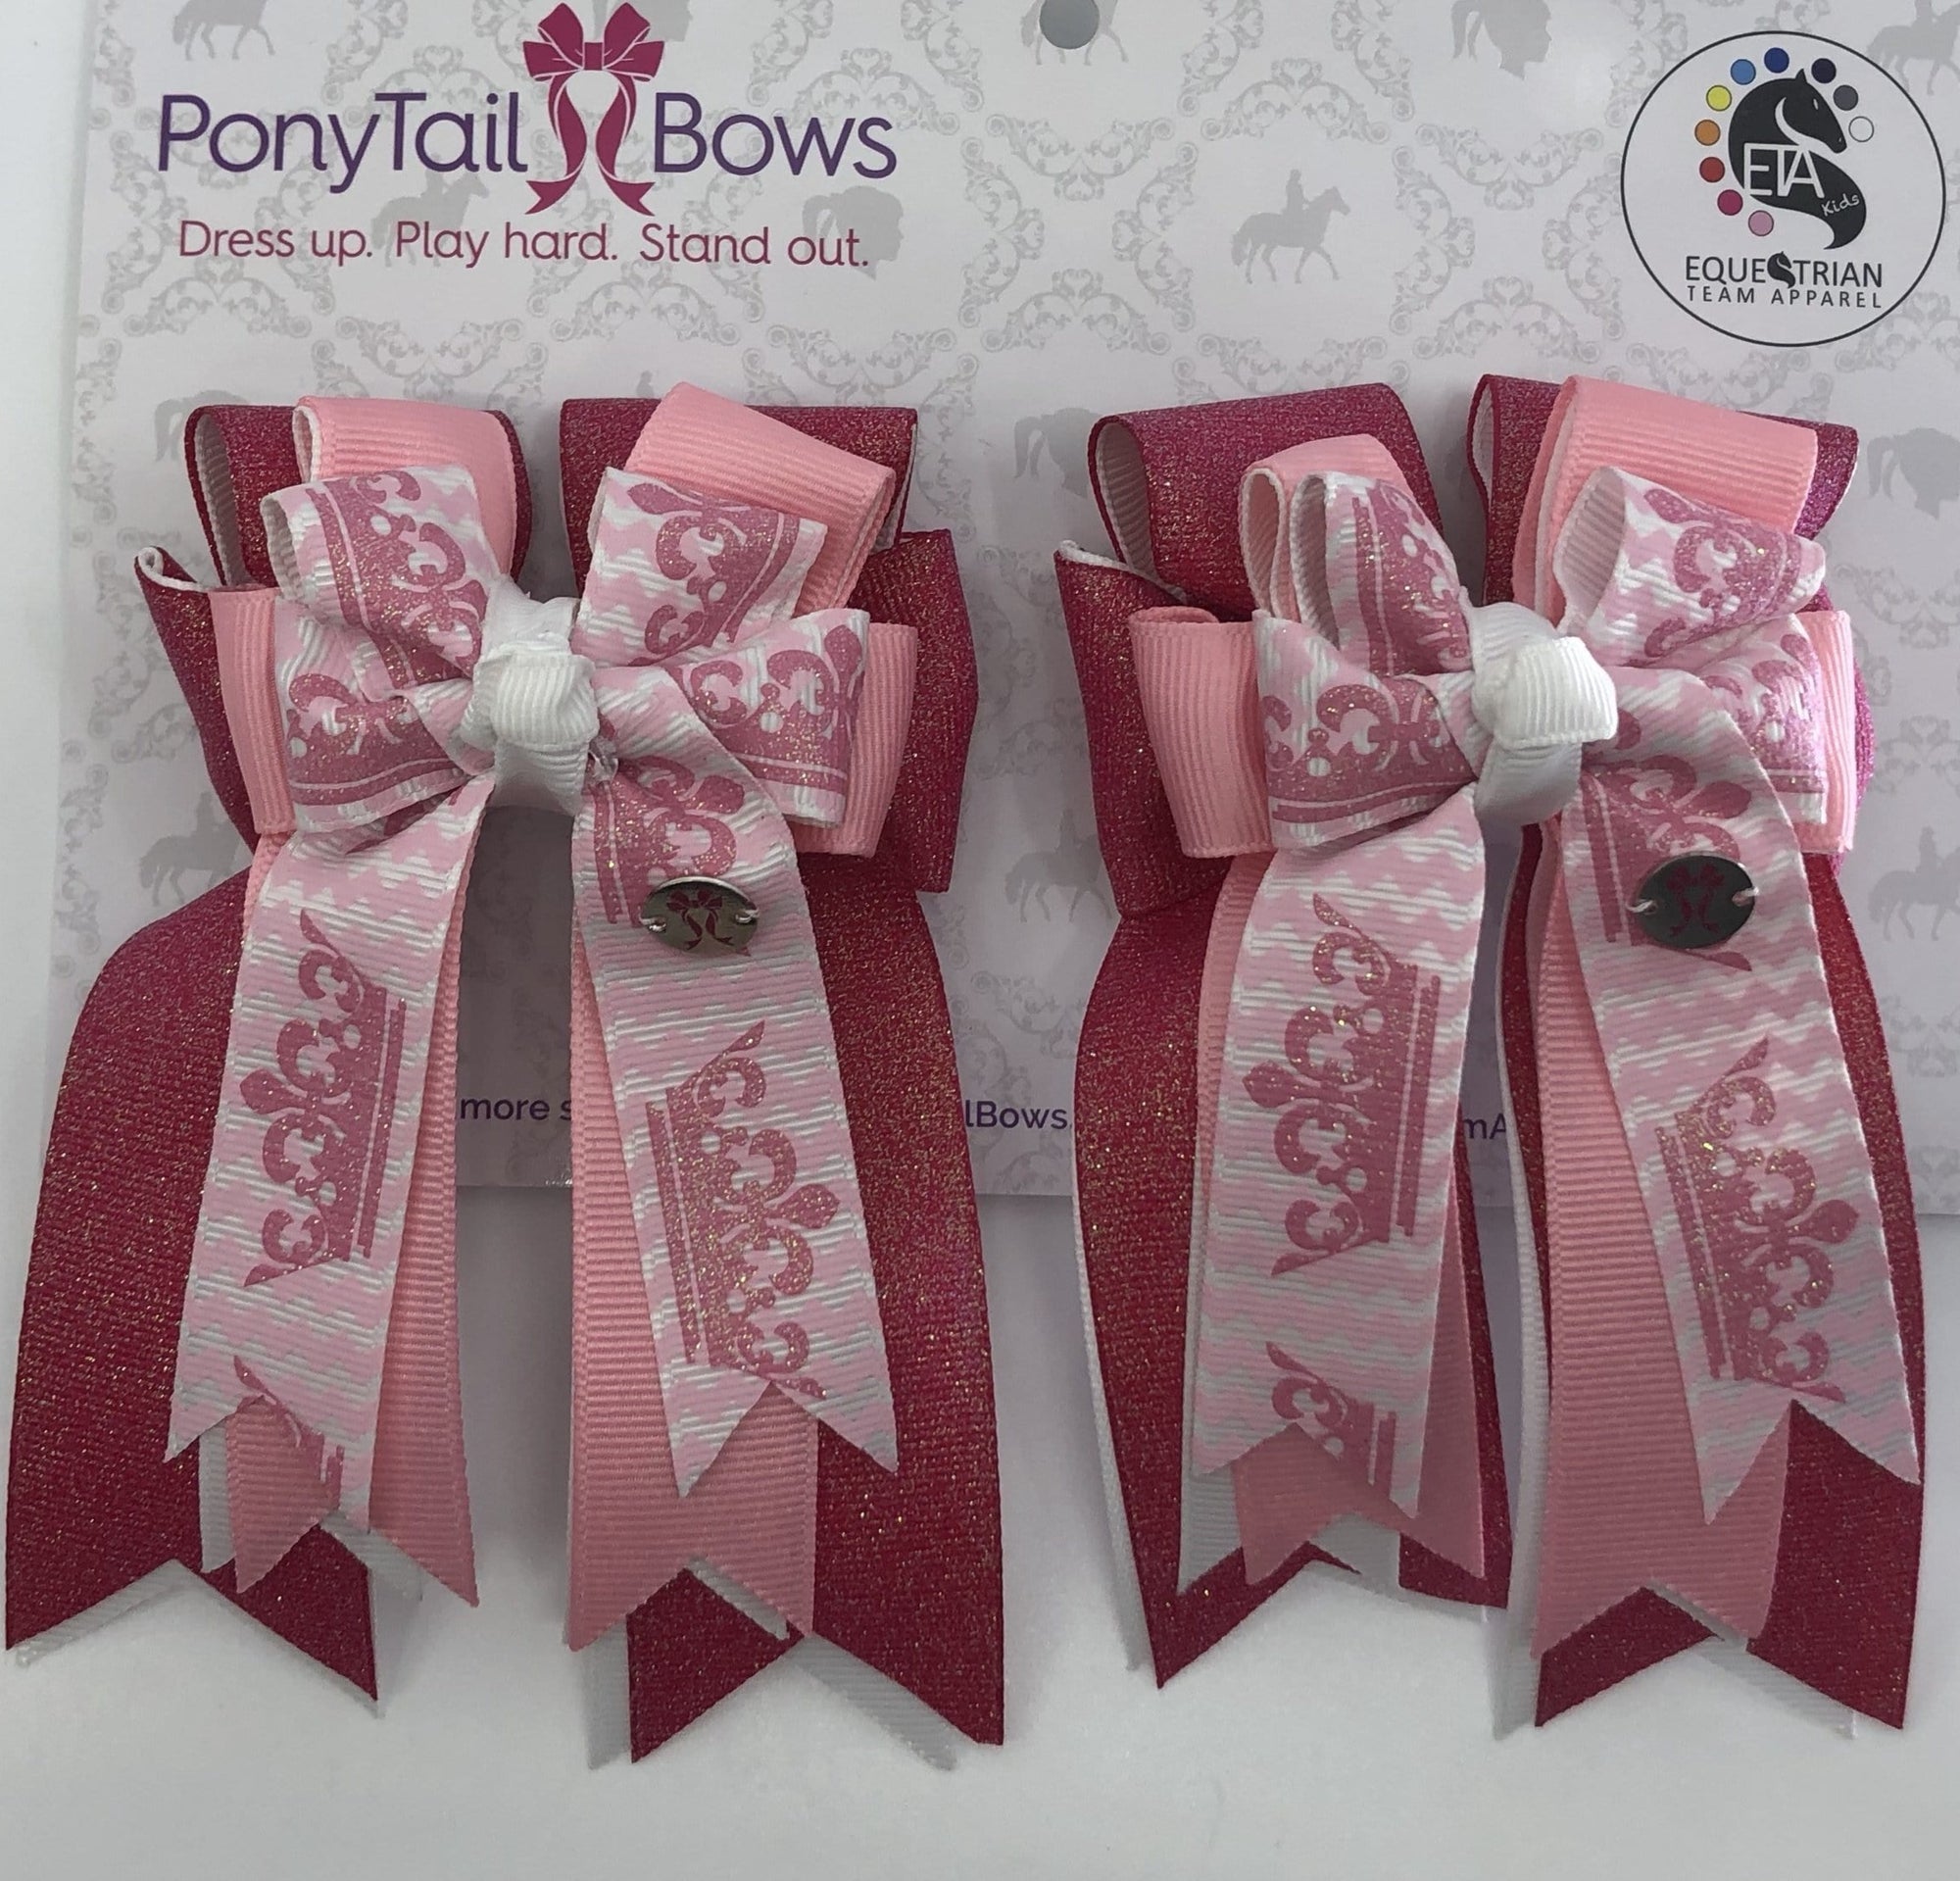 PonyTail Bows 3" Tails Pink Crowns PonyTail Bows equestrian team apparel online tack store mobile tack store custom farm apparel custom show stable clothing equestrian lifestyle horse show clothing riding clothes PonyTail Bows | Equestrian Hair Accessories horses equestrian tack store